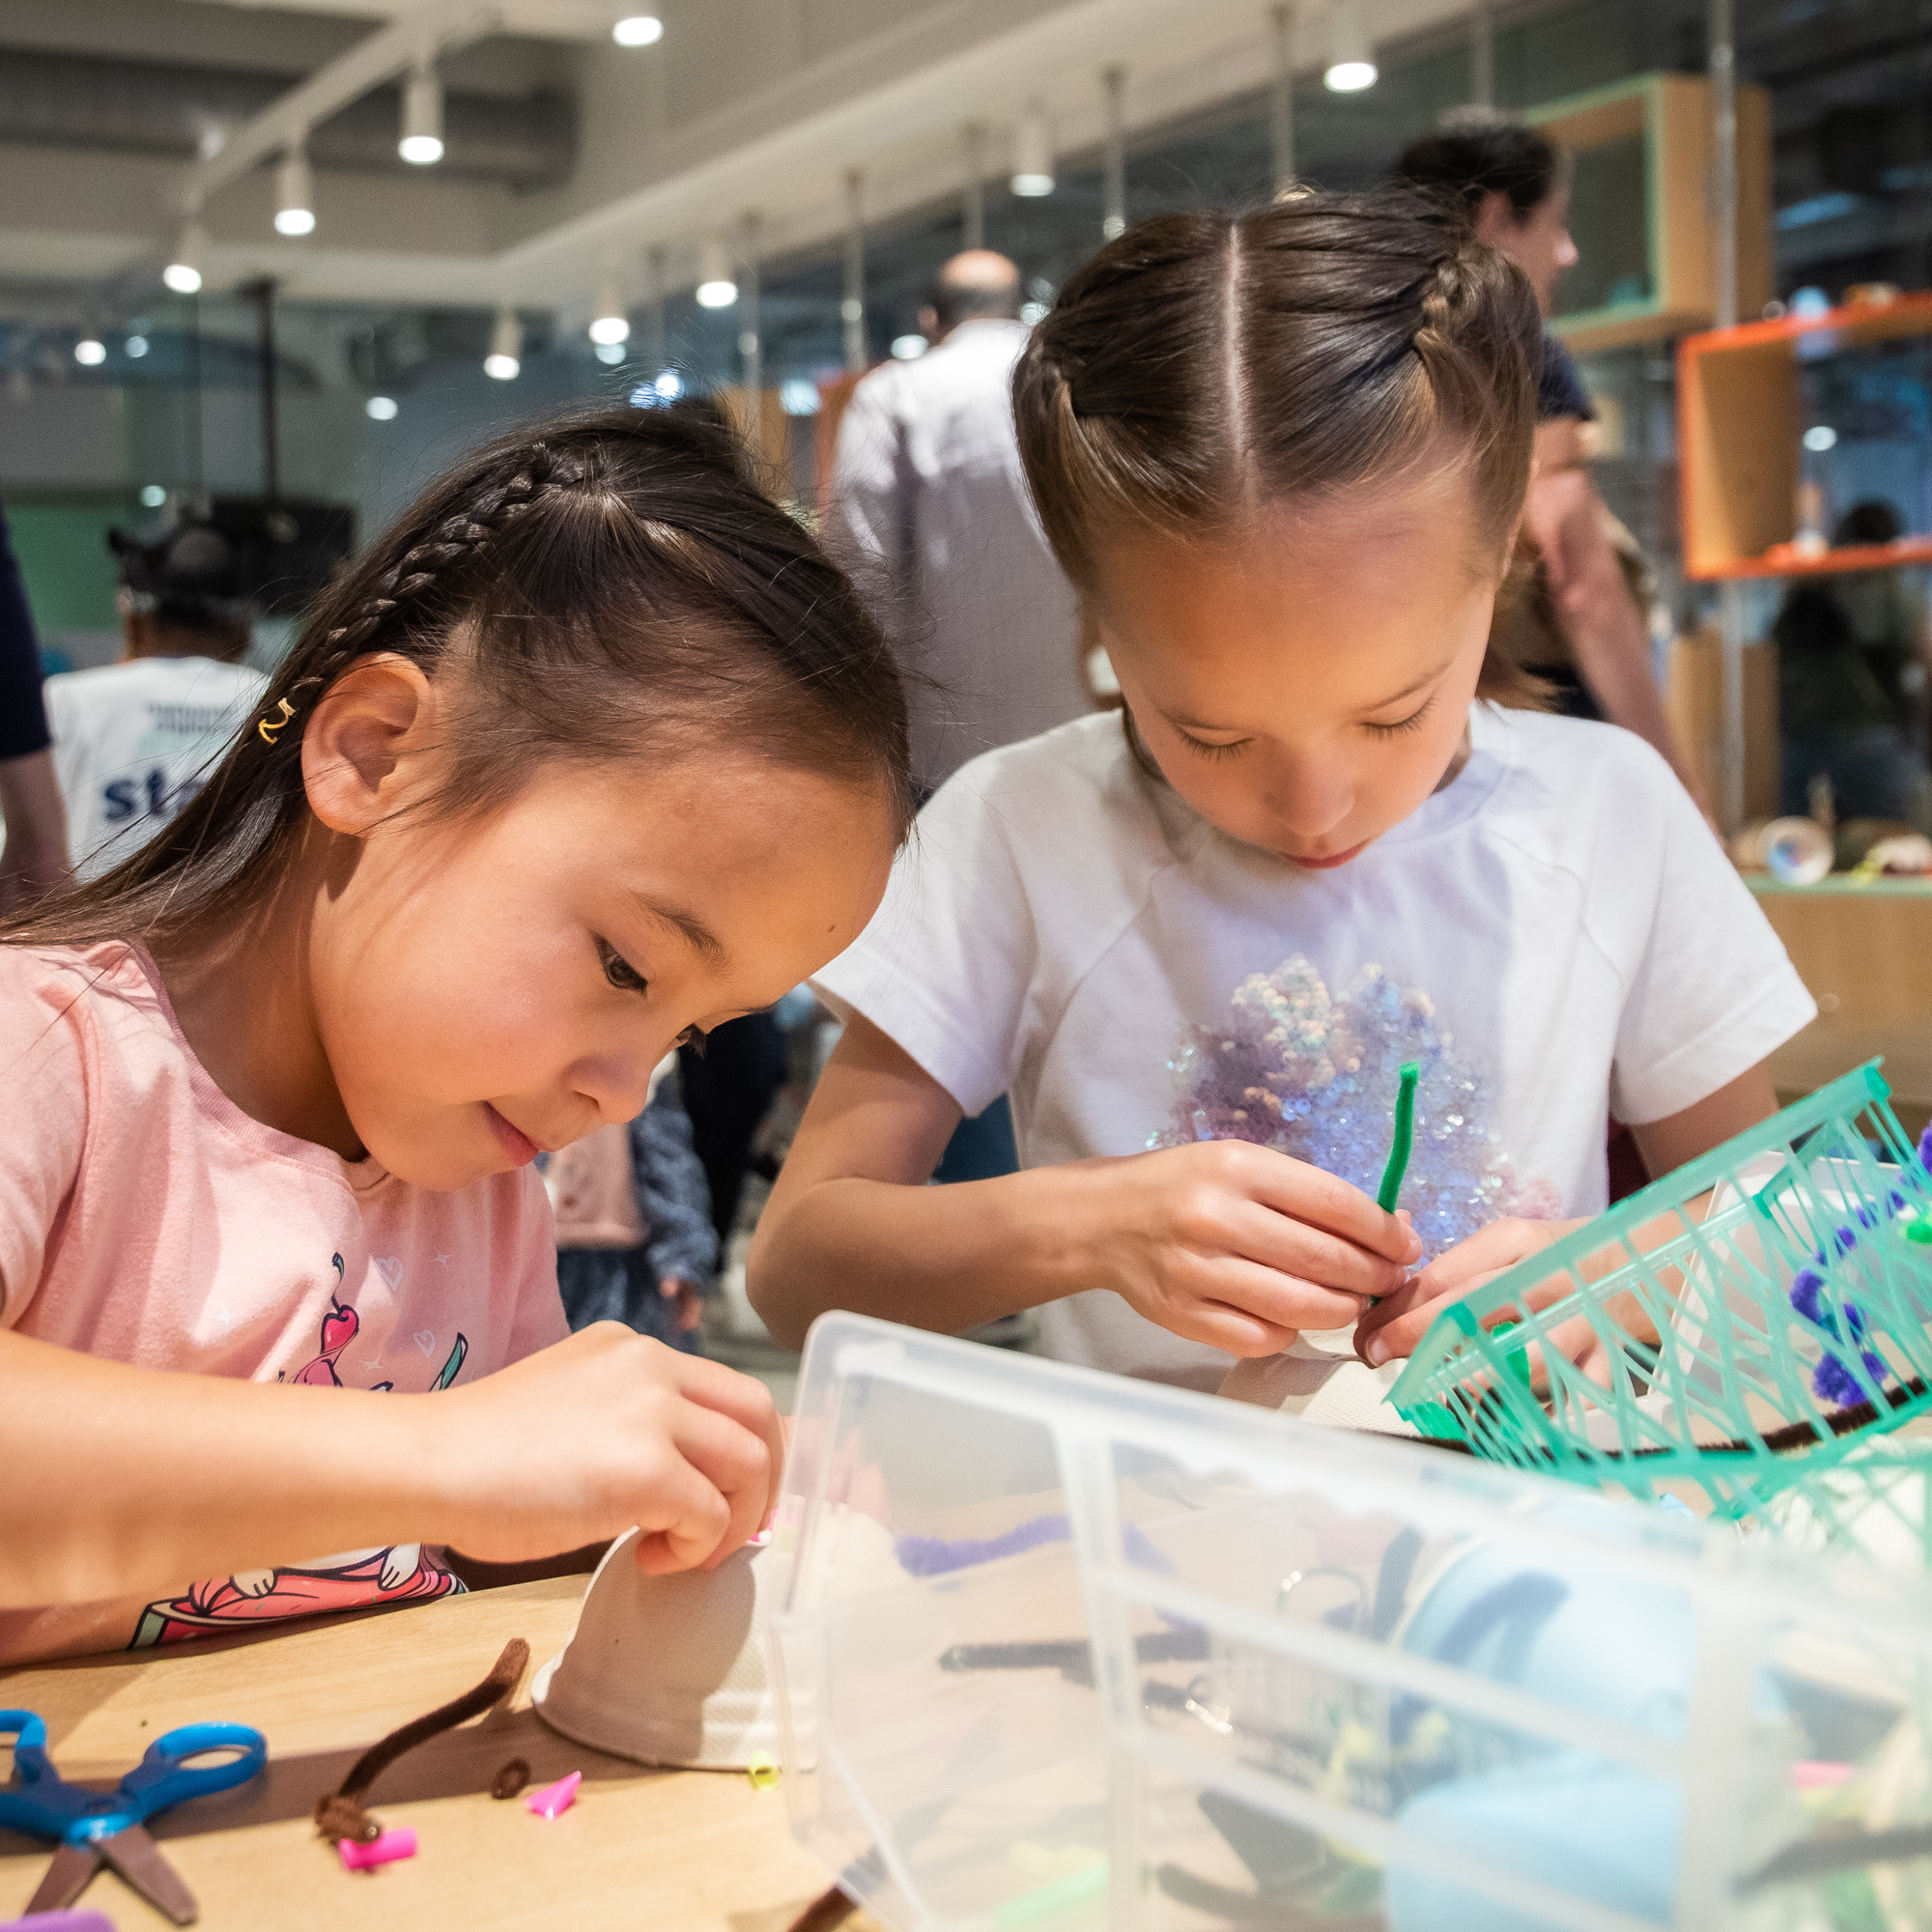 Two young girls building in the tinkerers studio.